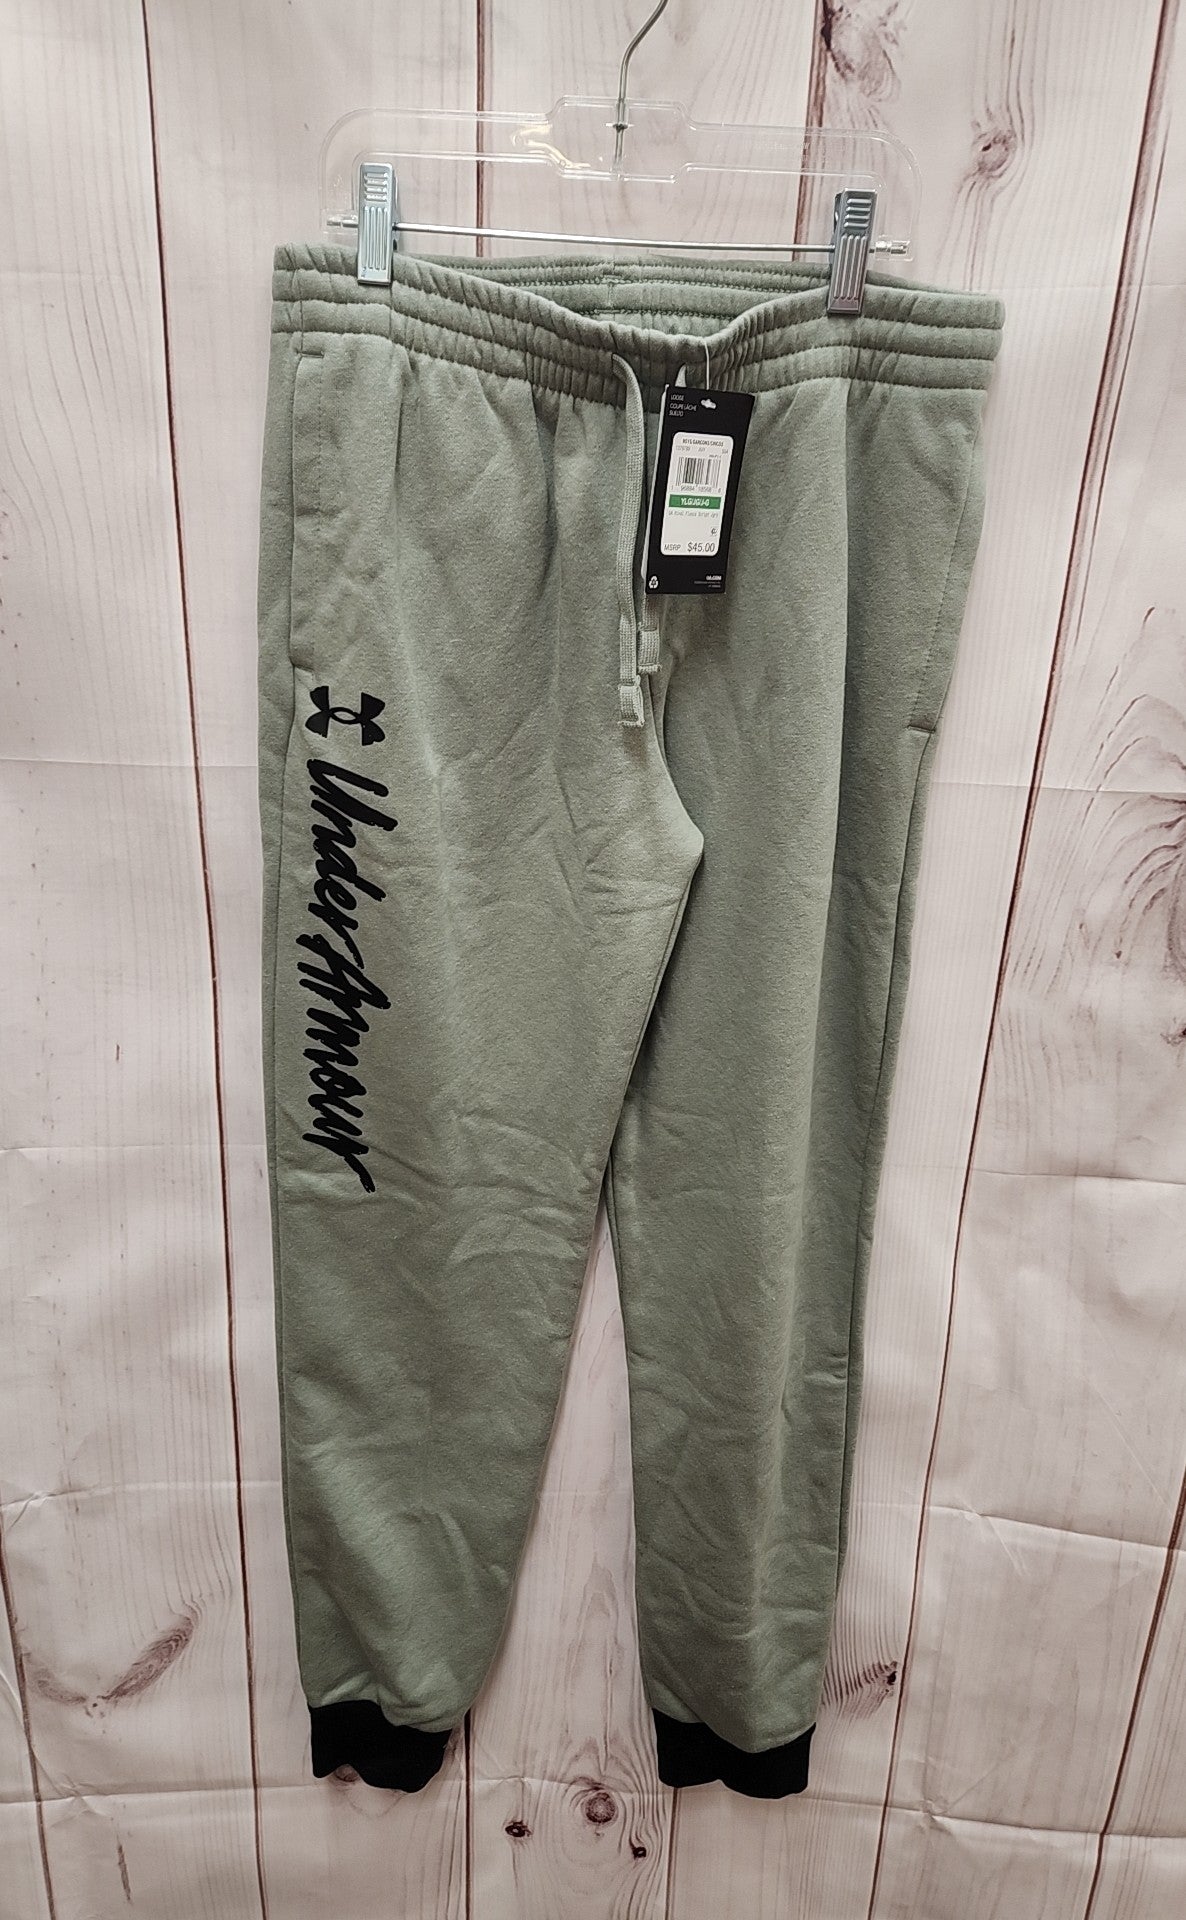 Under Armour Boy's Size 14 Green Sweatpants NWT